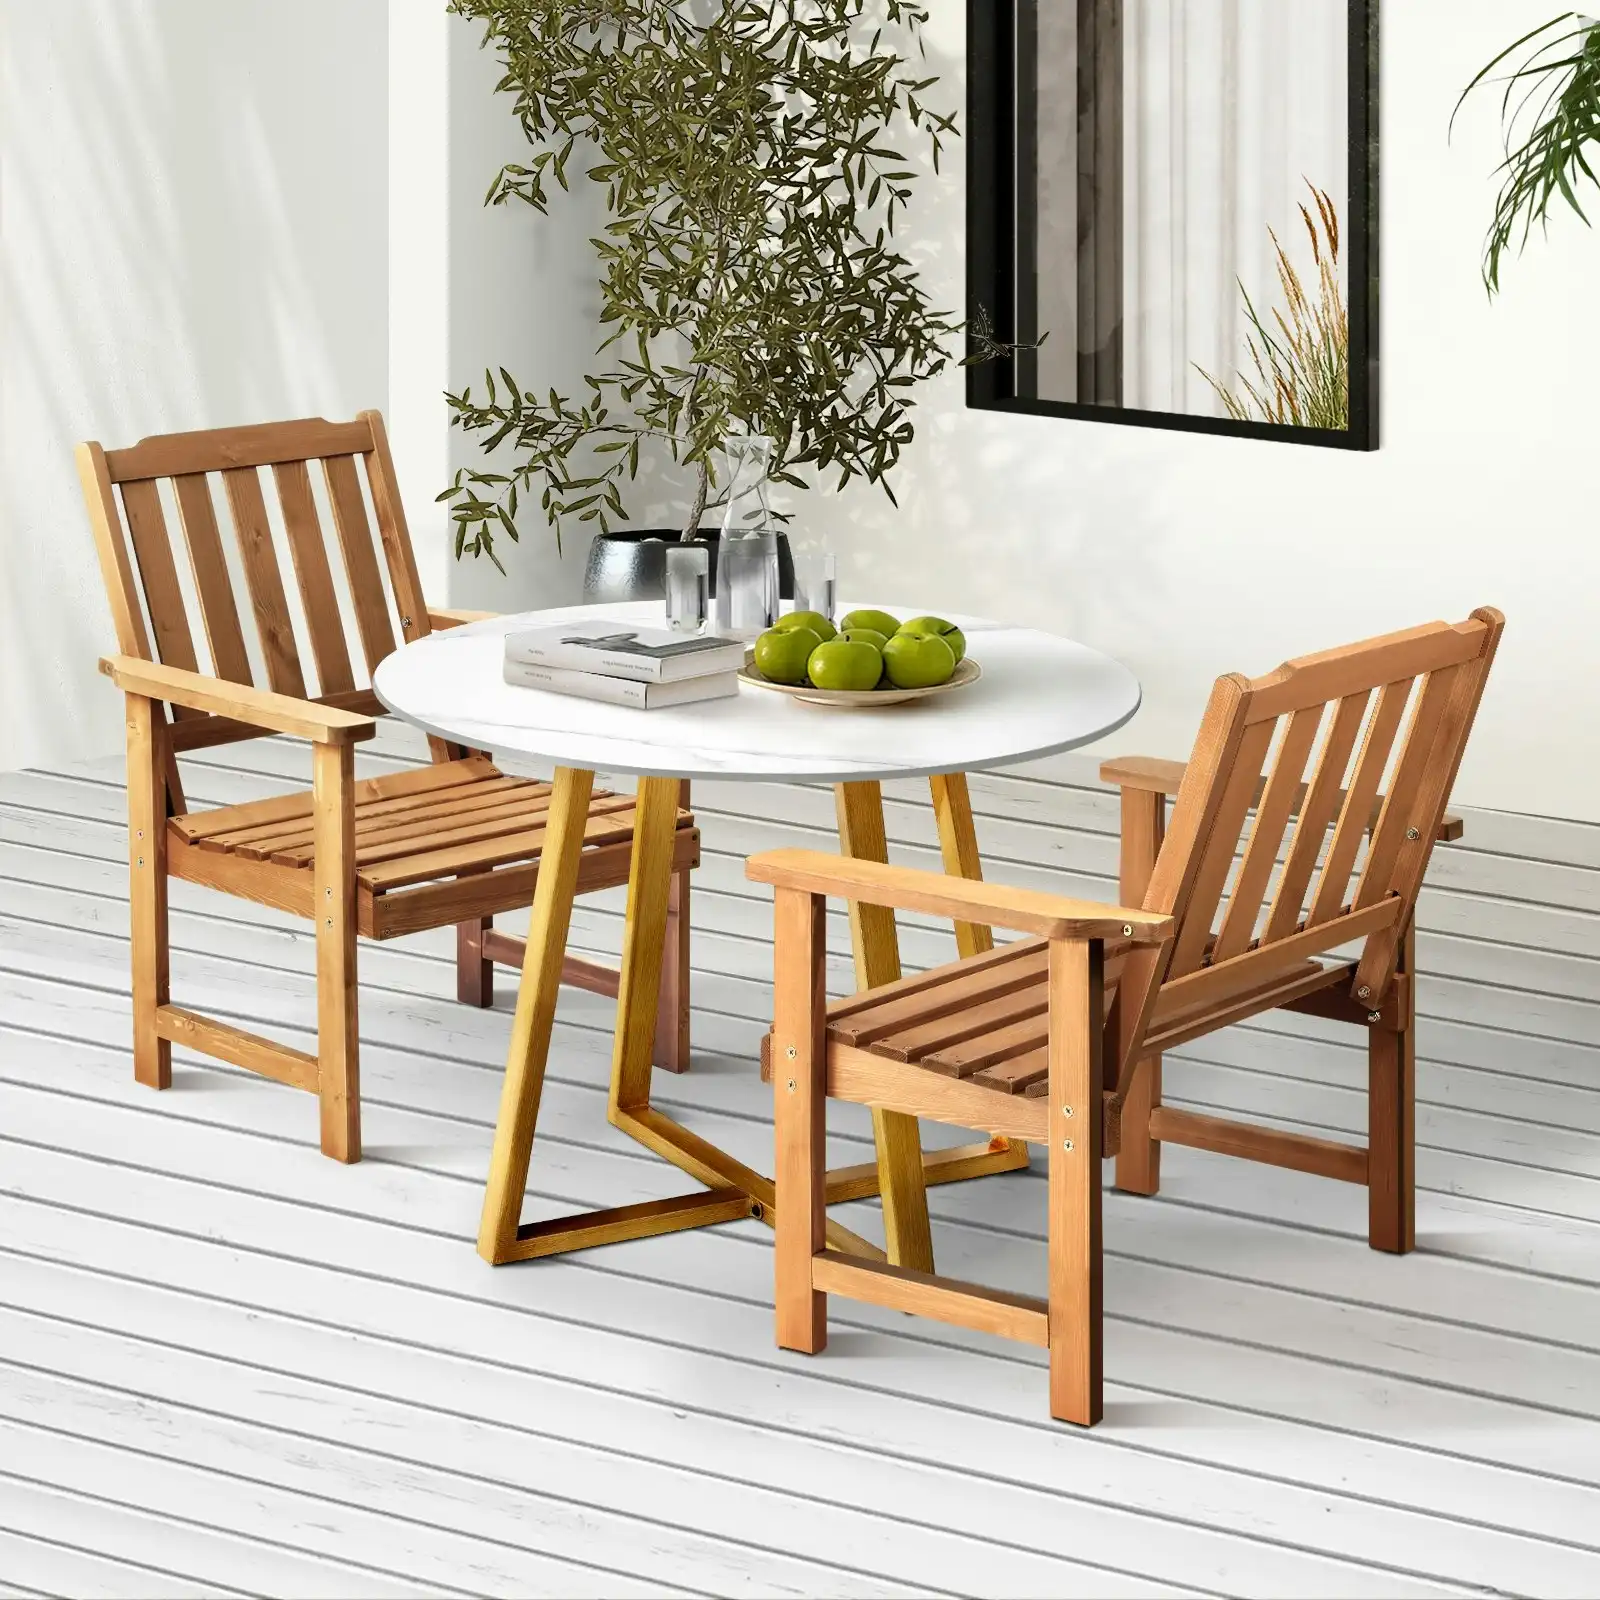 Livsip Outdoor Patio Set Solid Wood Chair and Table 3PC Furniture Dining Setting